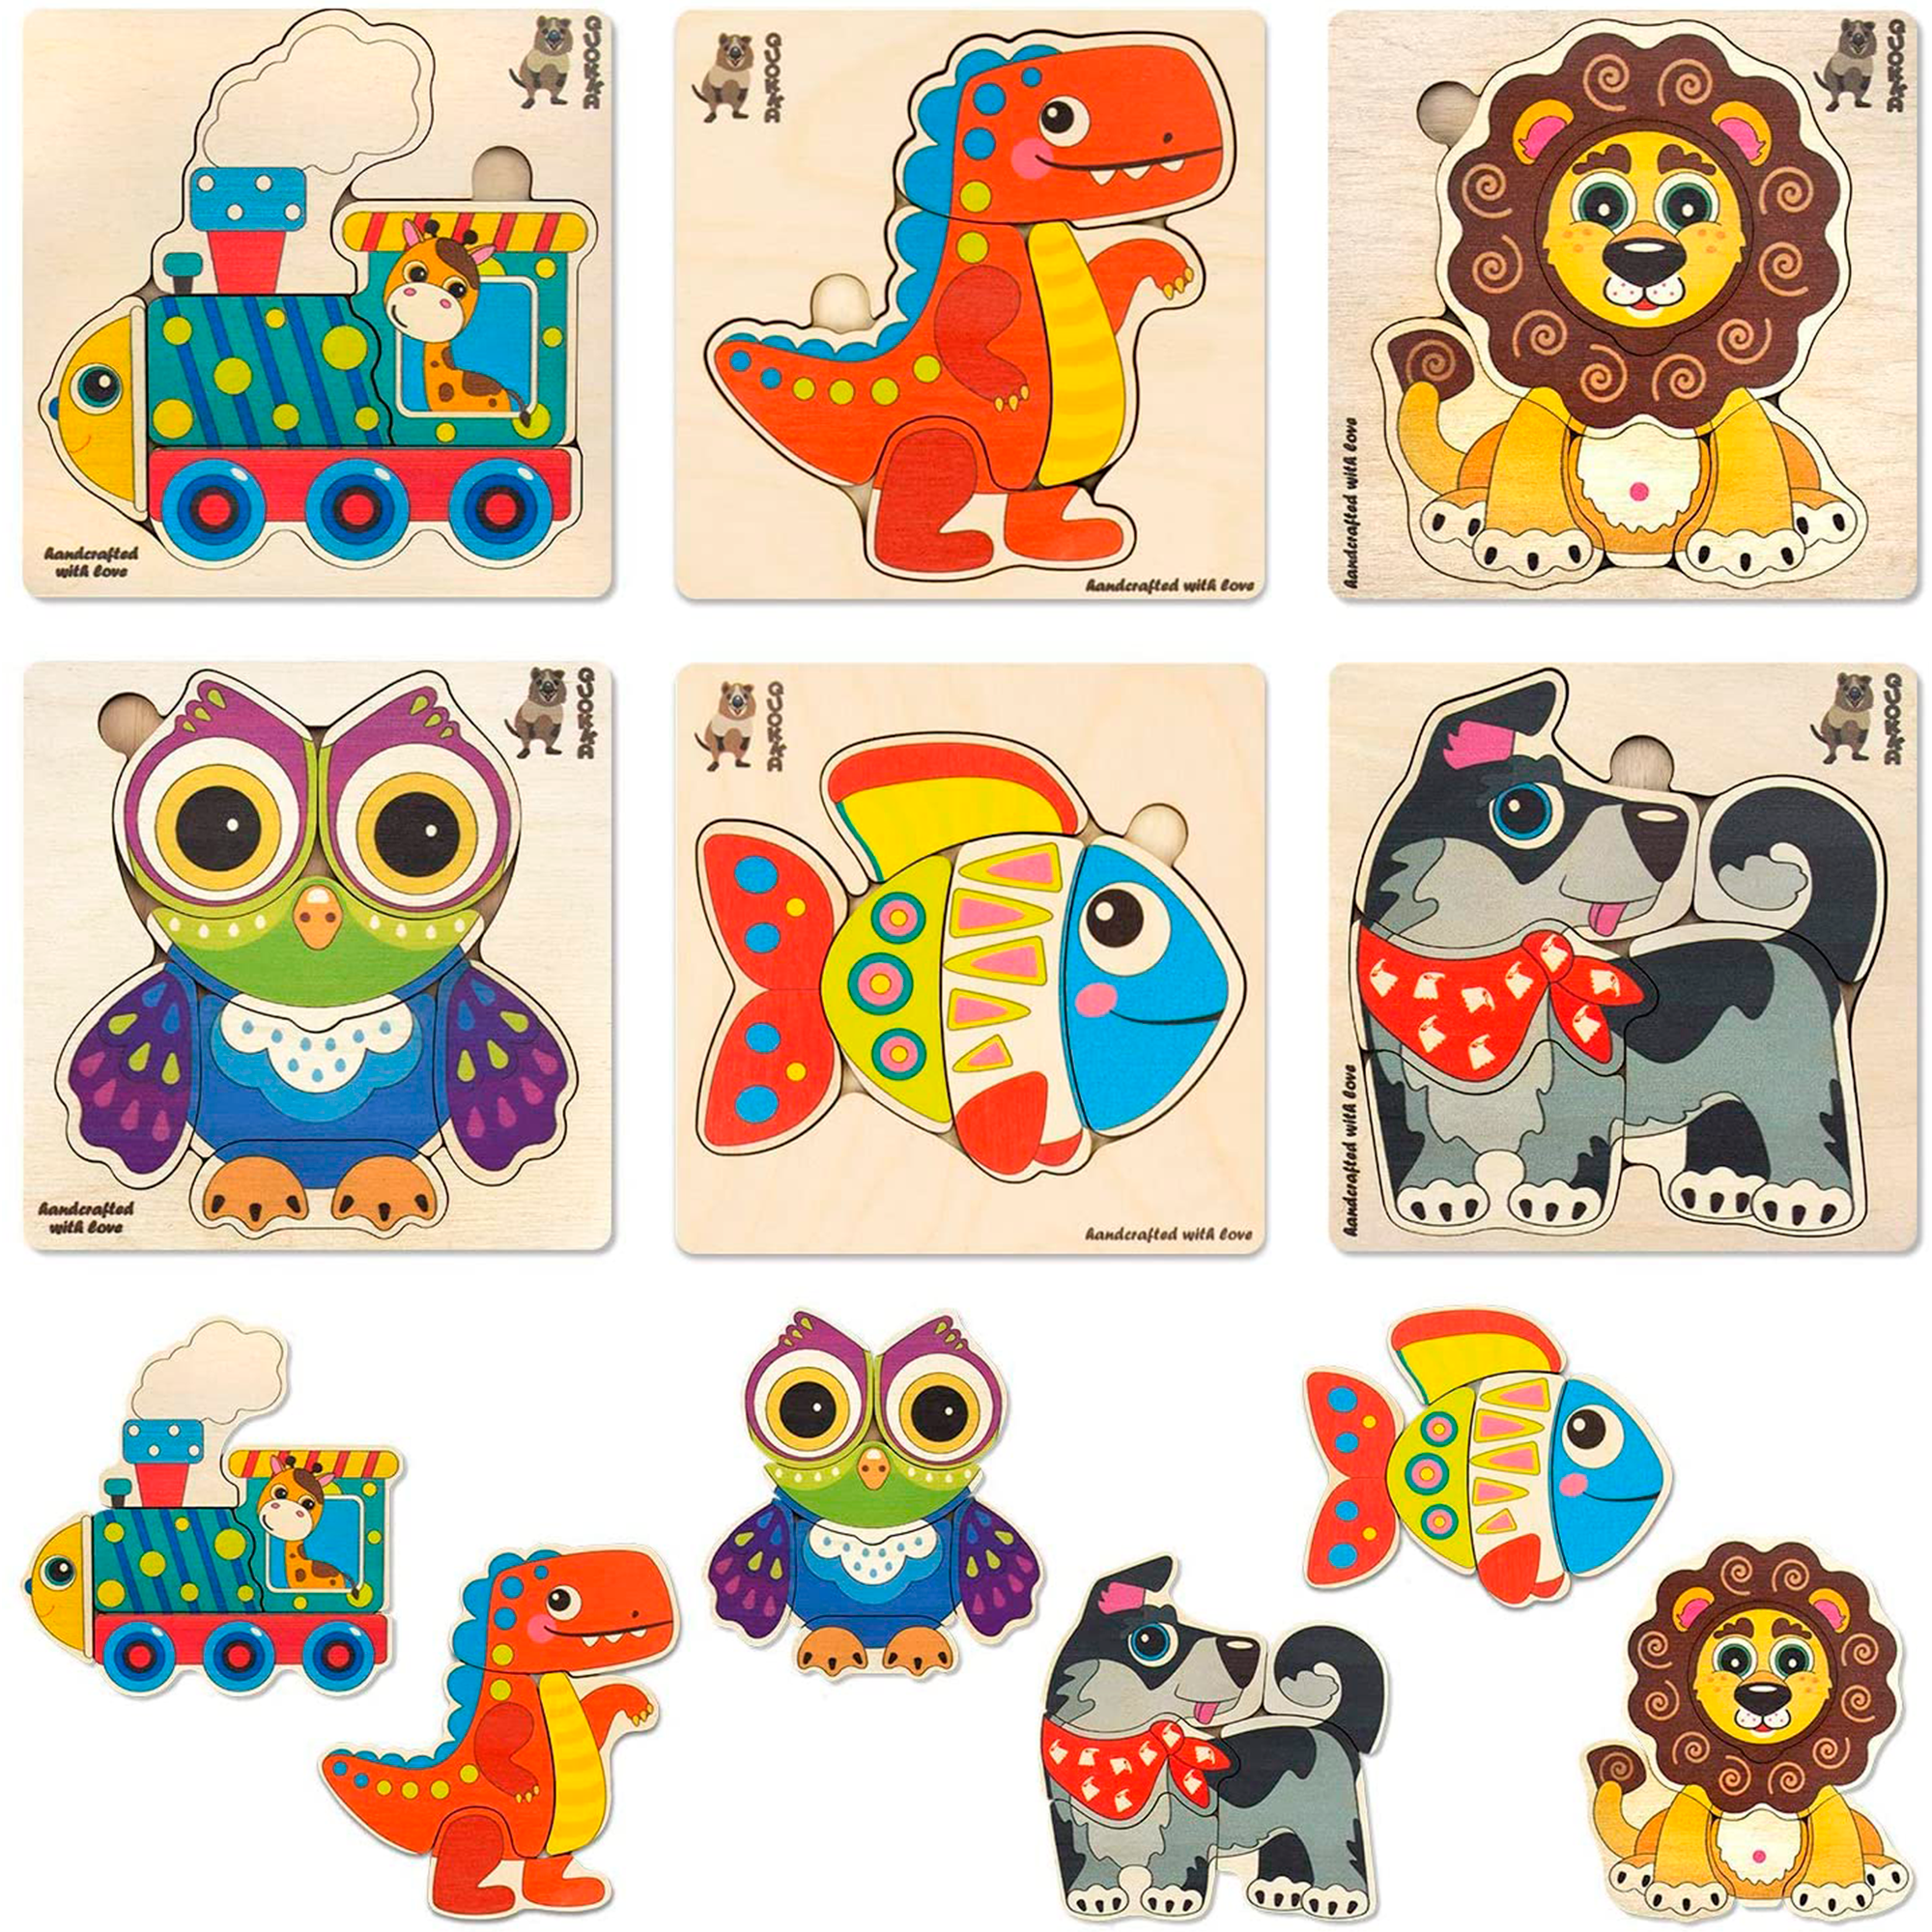 New Animal Shape Wooden Jigsaw Puzzles Pieces Adult Kids Education Toys Gift 